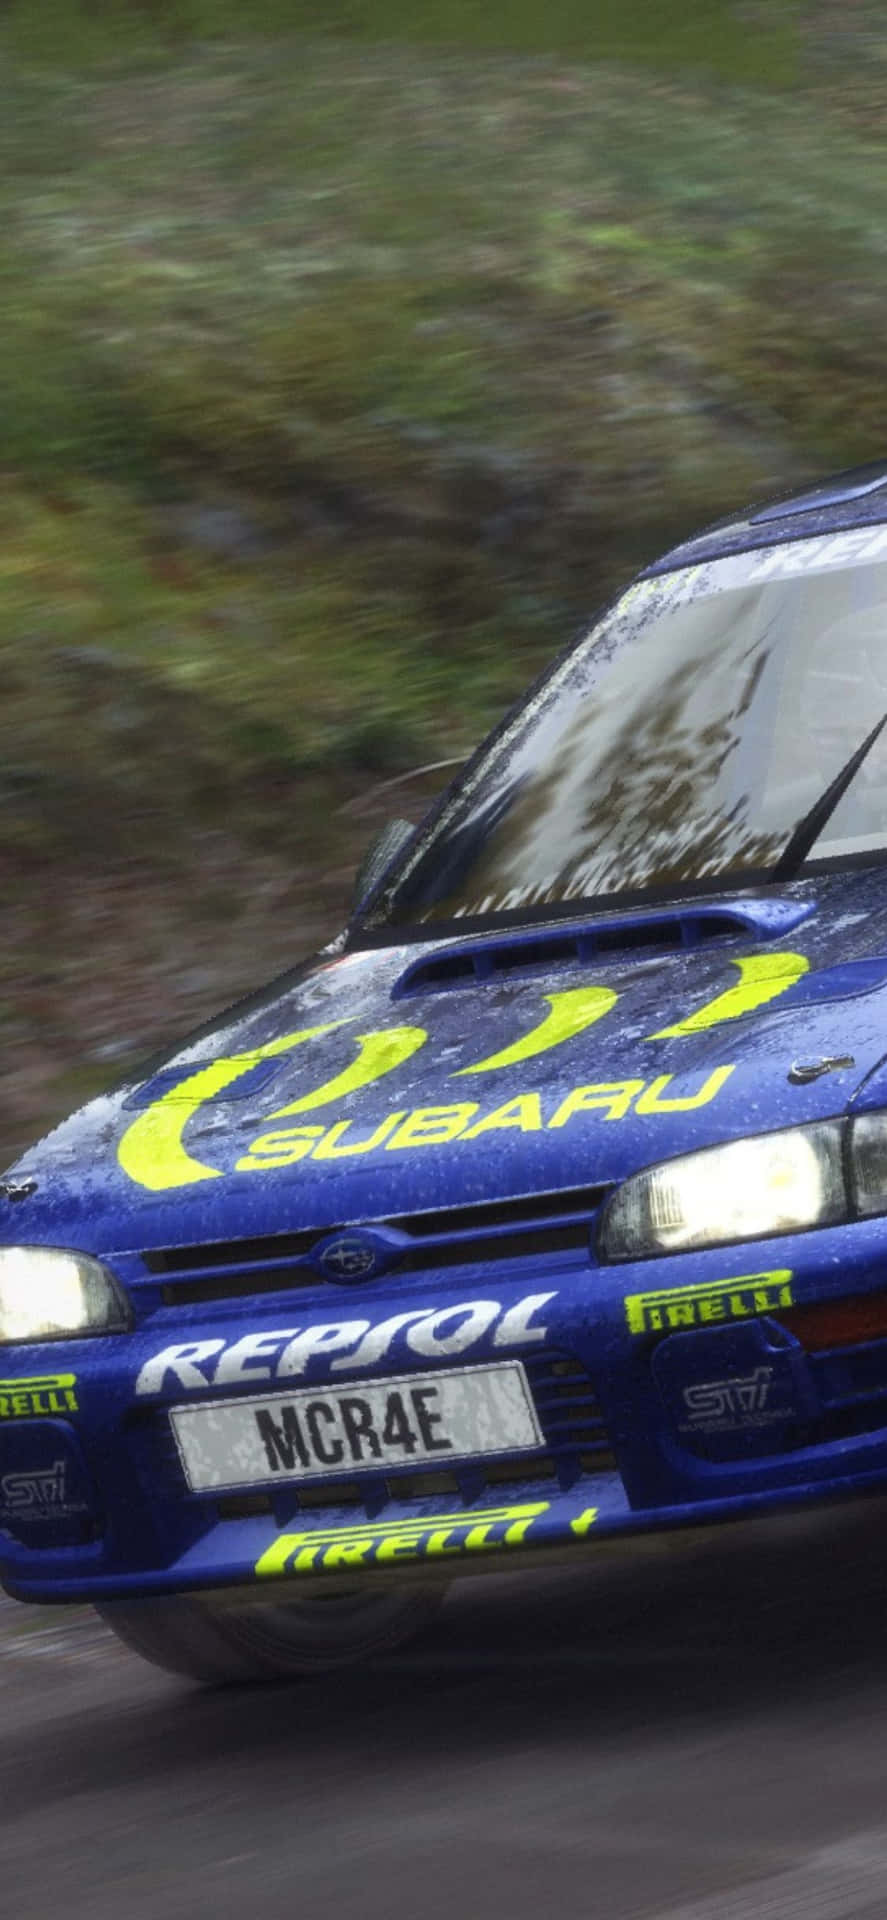 Feel the Thrill of Driving Like a Real Rally Racer